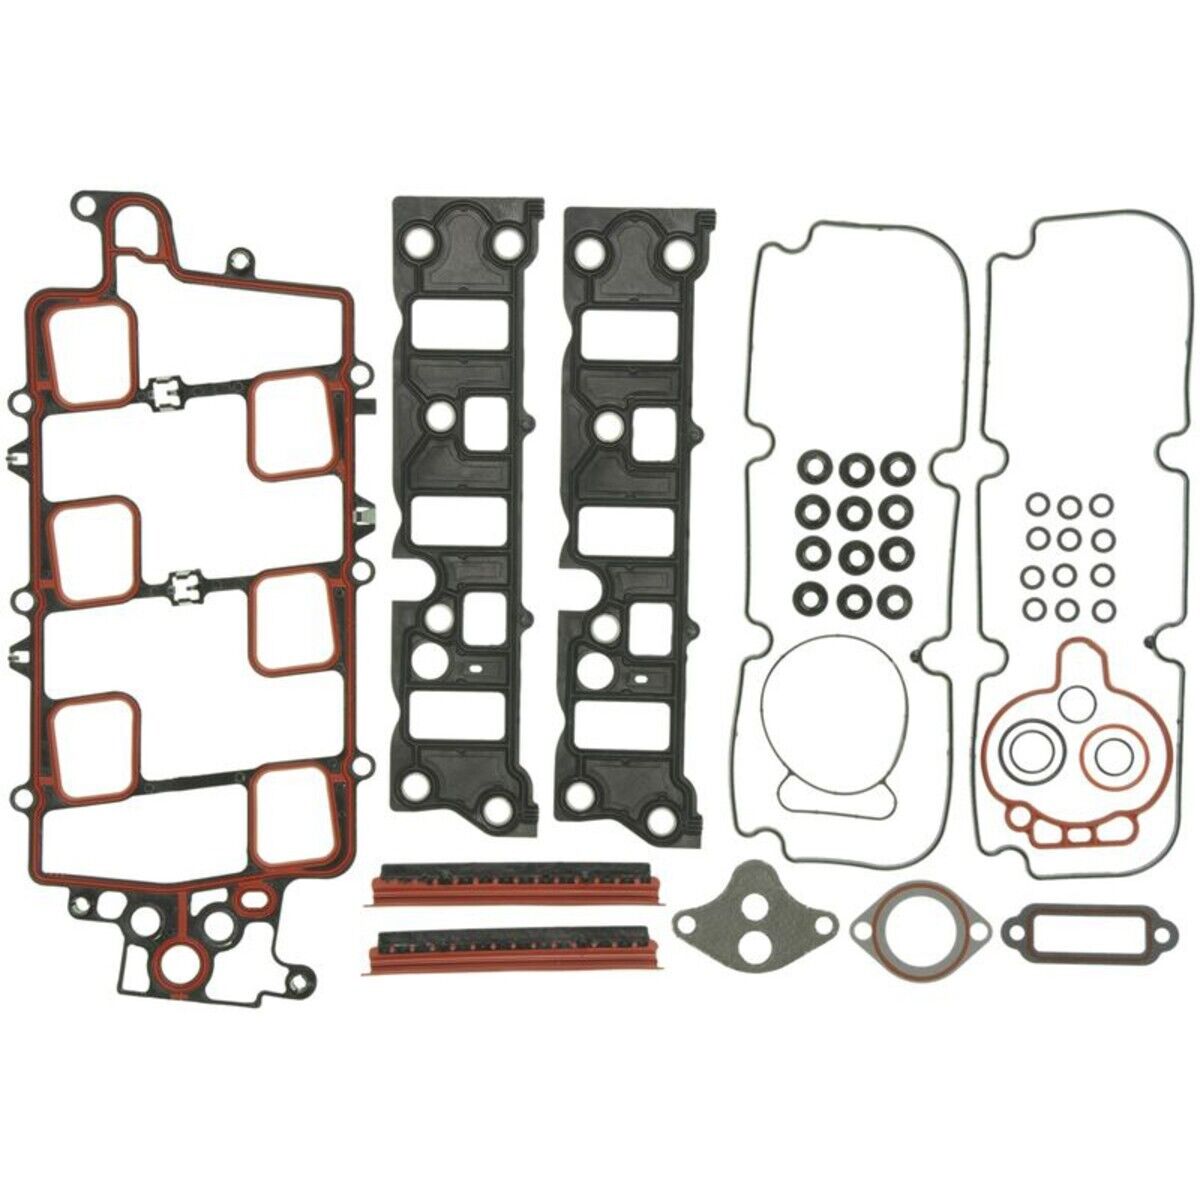 MIS16203A Mahle Intake Manifold Gaskets Set for Chevy Olds Le Sabre Impala Buick